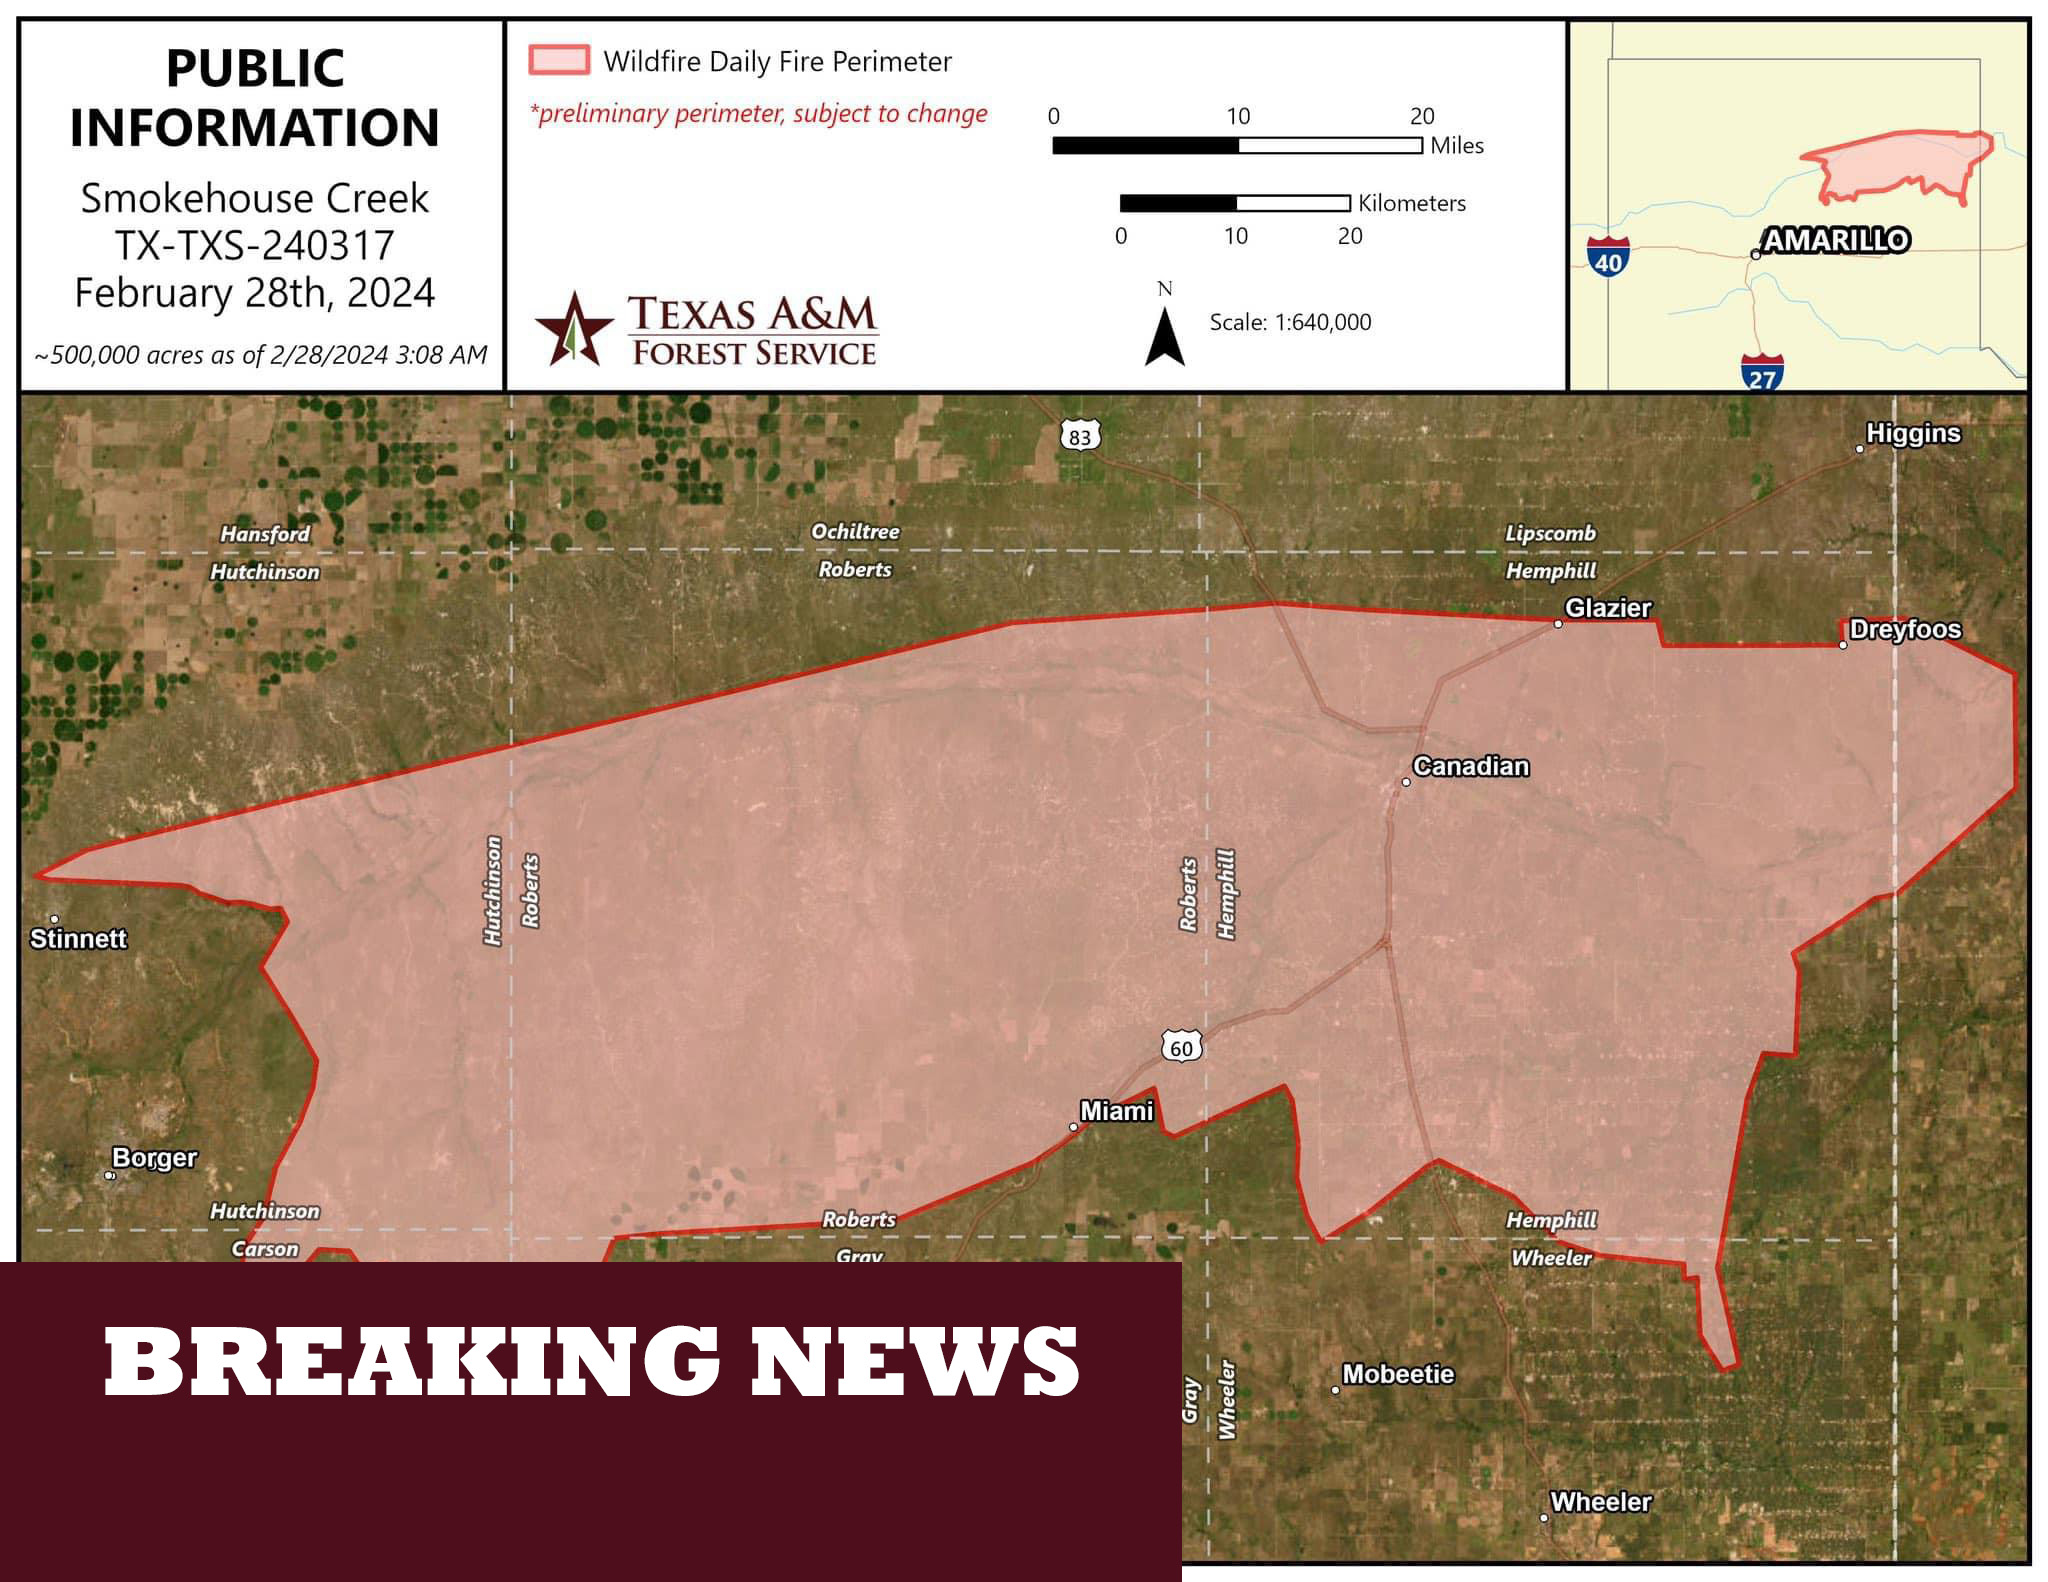 Texas A&M Forrest Service map - Smokehouse Creek wildfire perimeter